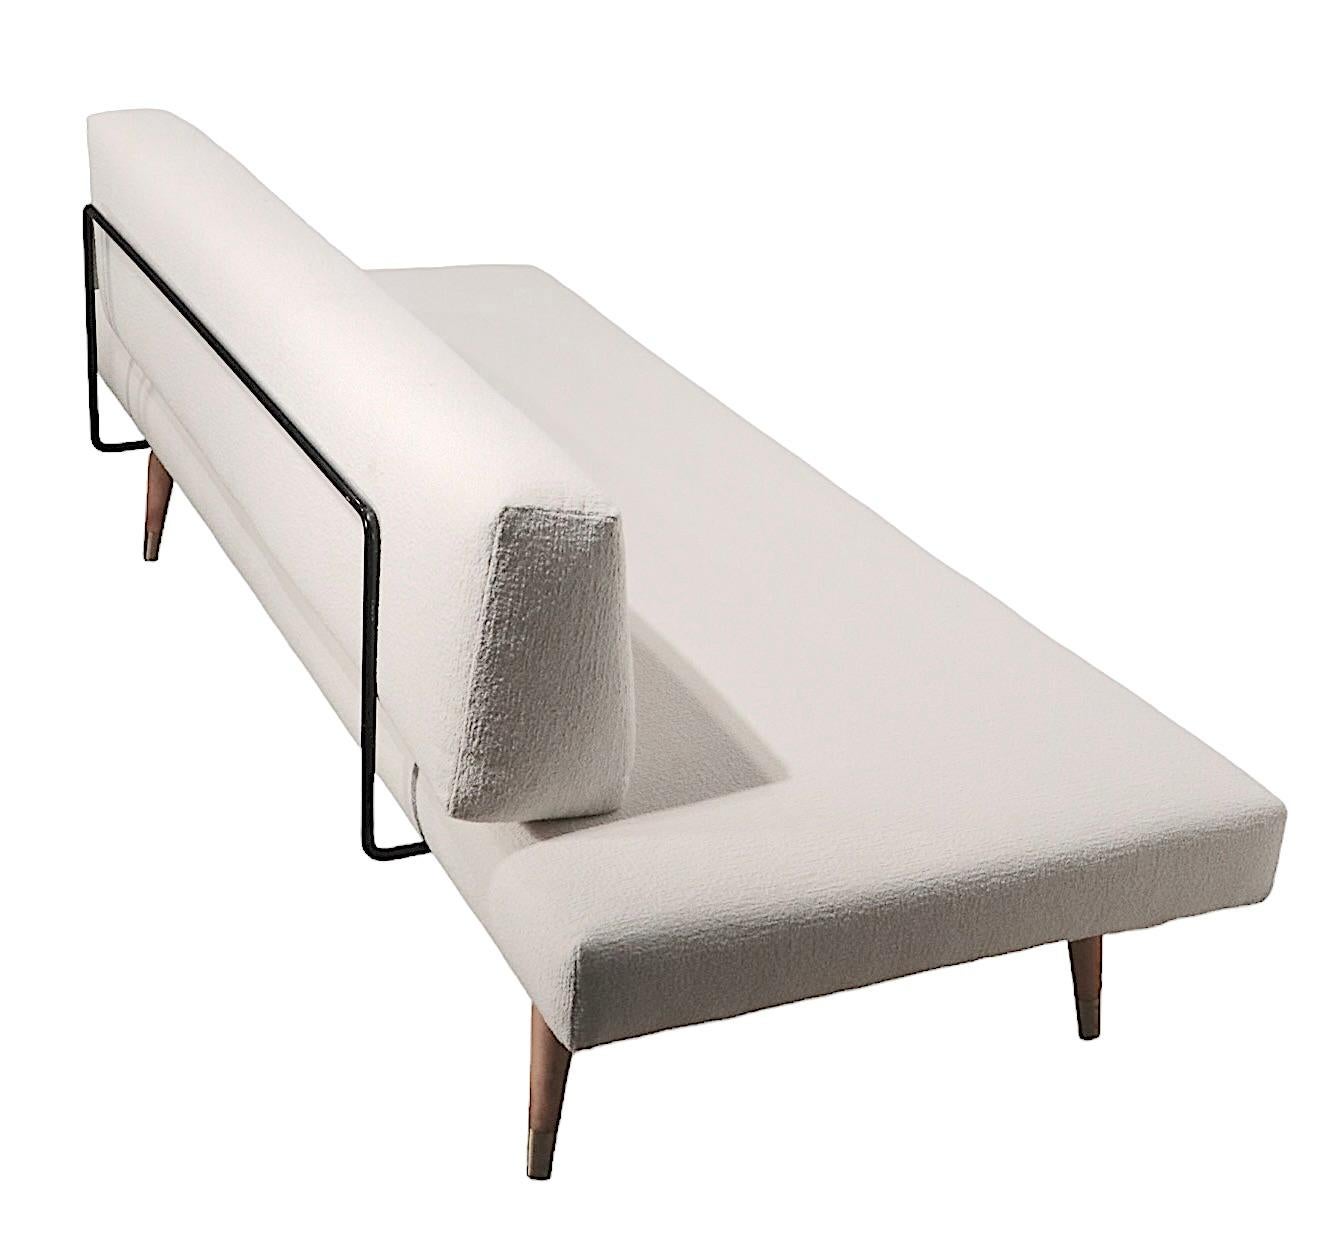 Pr. Mid Century Daybeds Newly Upholstered in Off White Boucle Fabric, c. 1950's 6